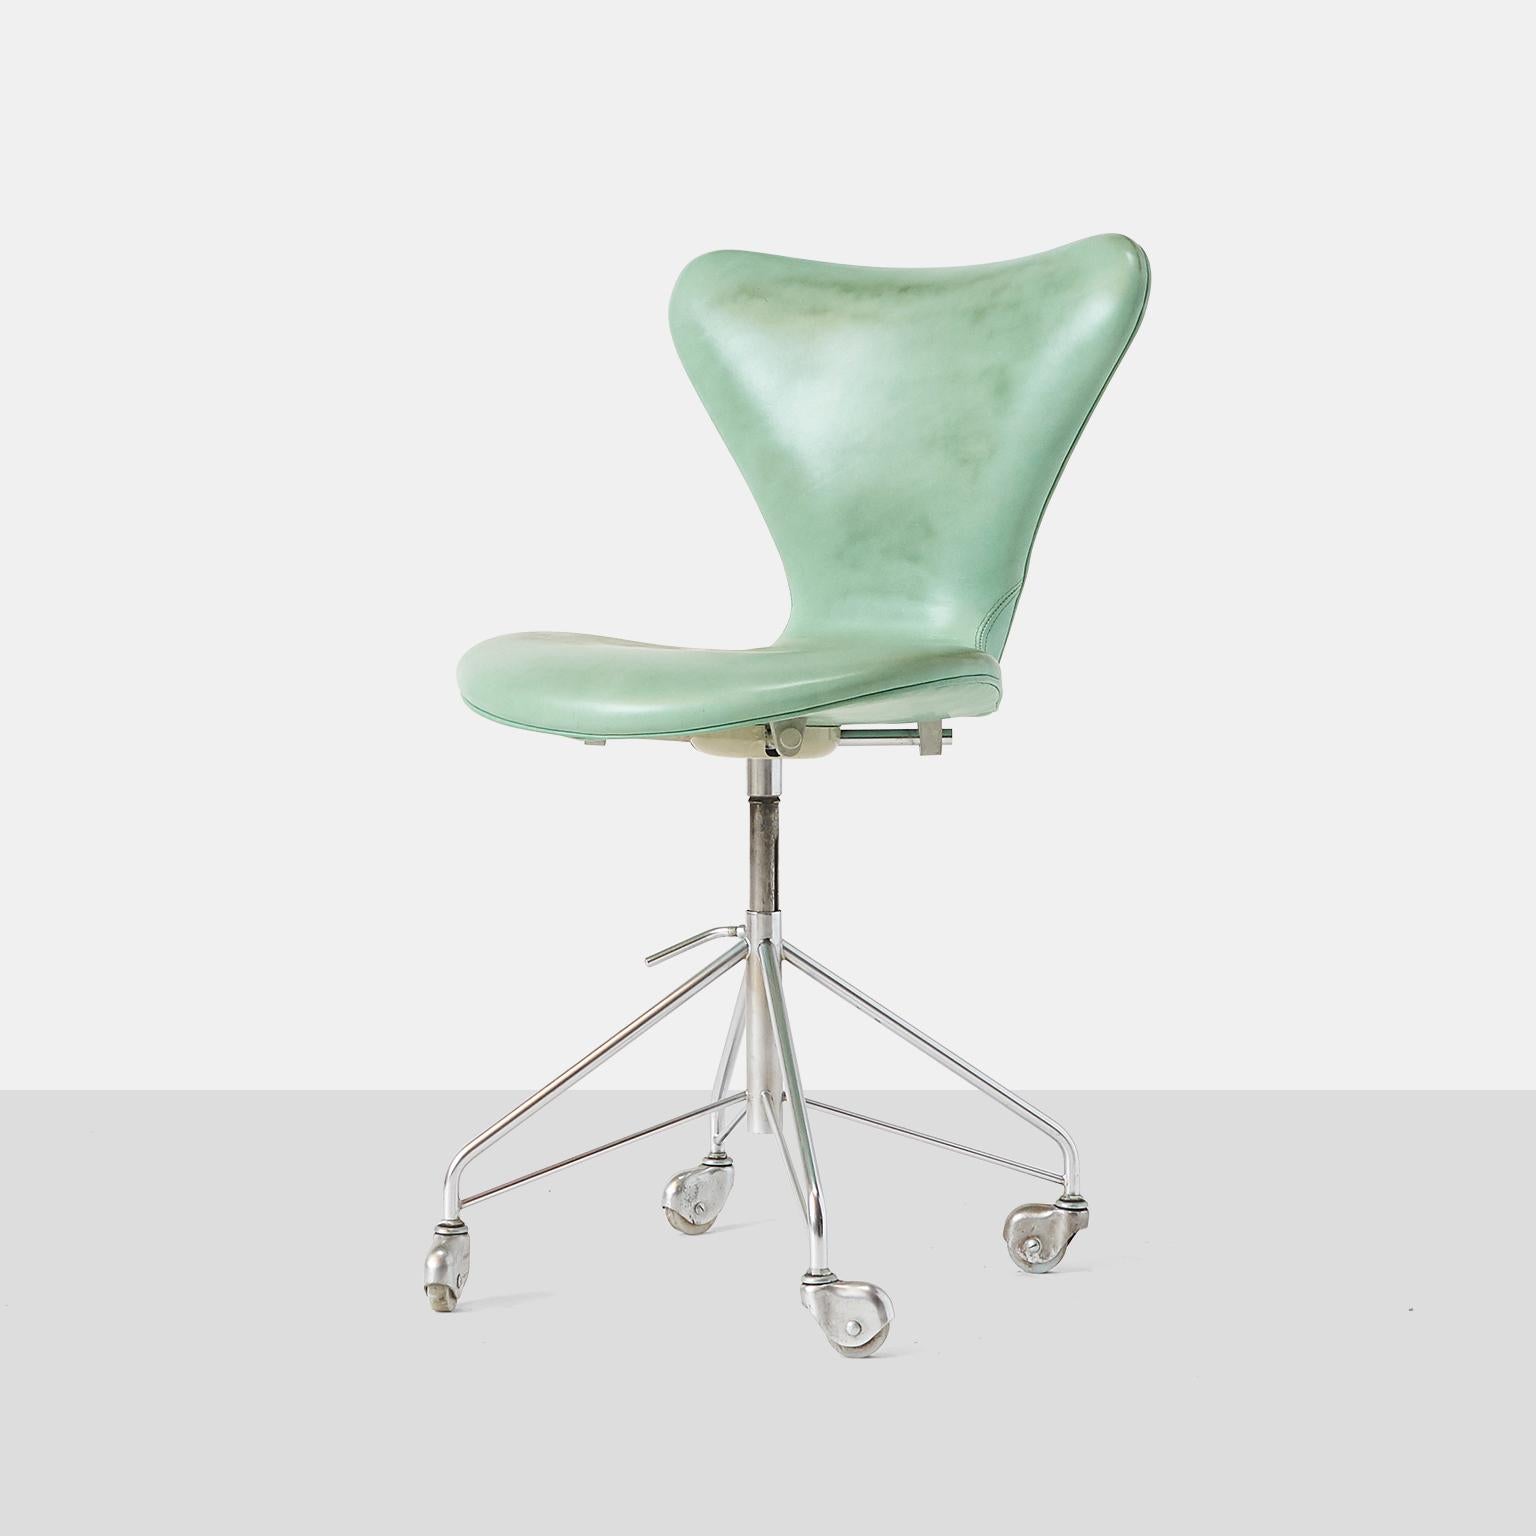 A series 7, model #3117, swivel base office chair with chromed steel feet on casters and an adjustable seat height Designed in 1955, this model has become the most popular design within Fritz Hansen’s chair collection This earlier example has been